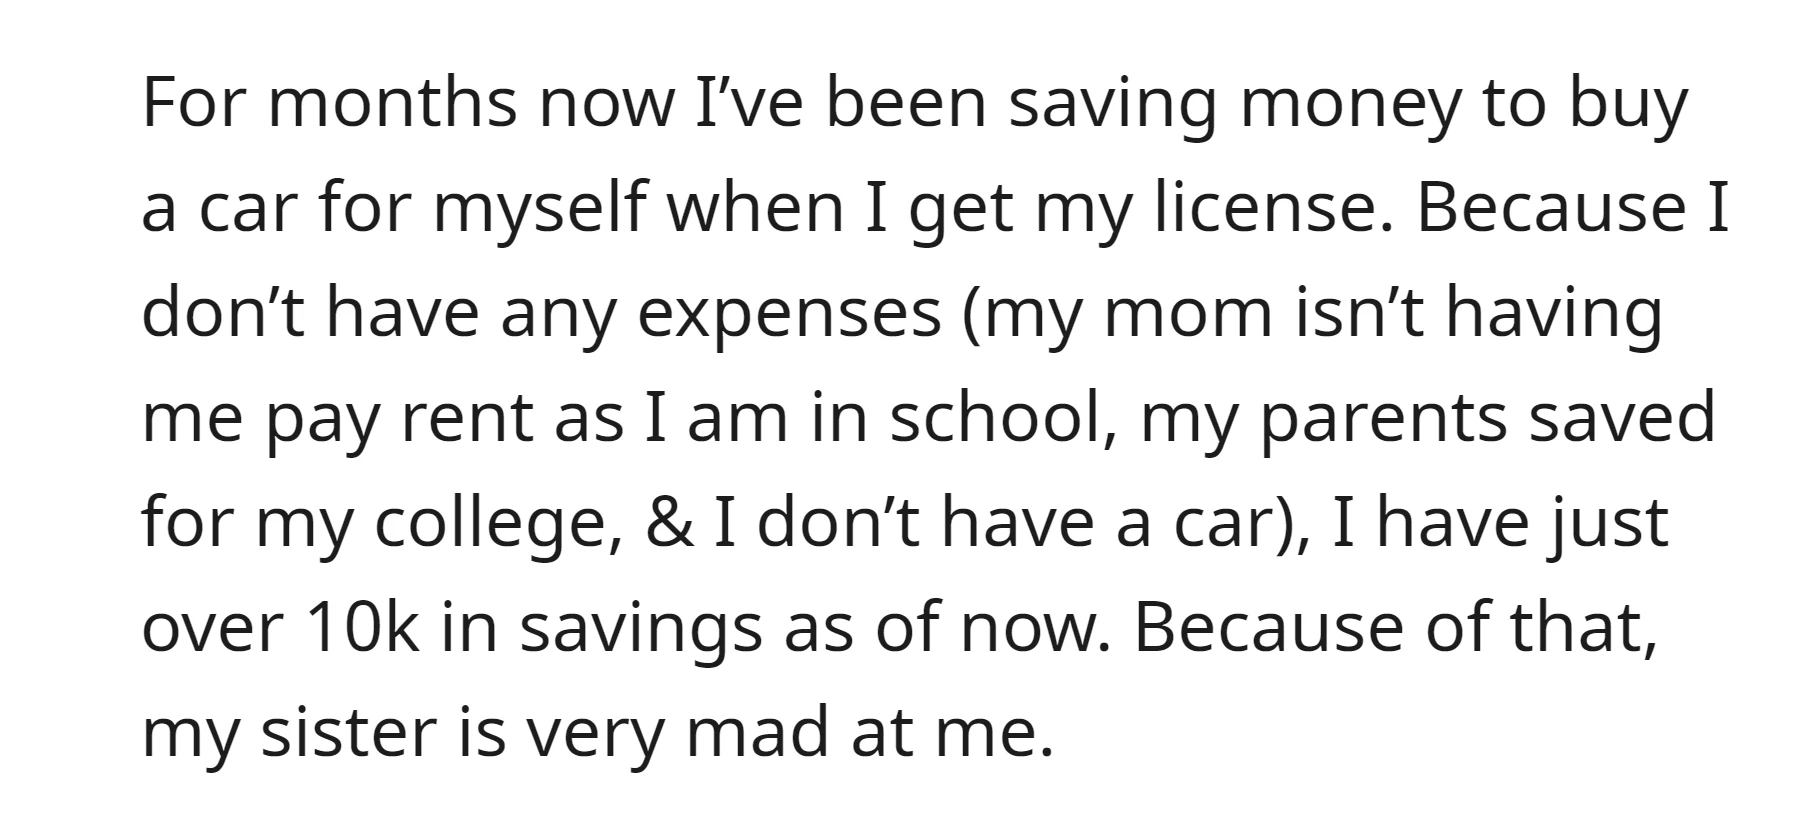 The OP has been saving money to buy a car for herself